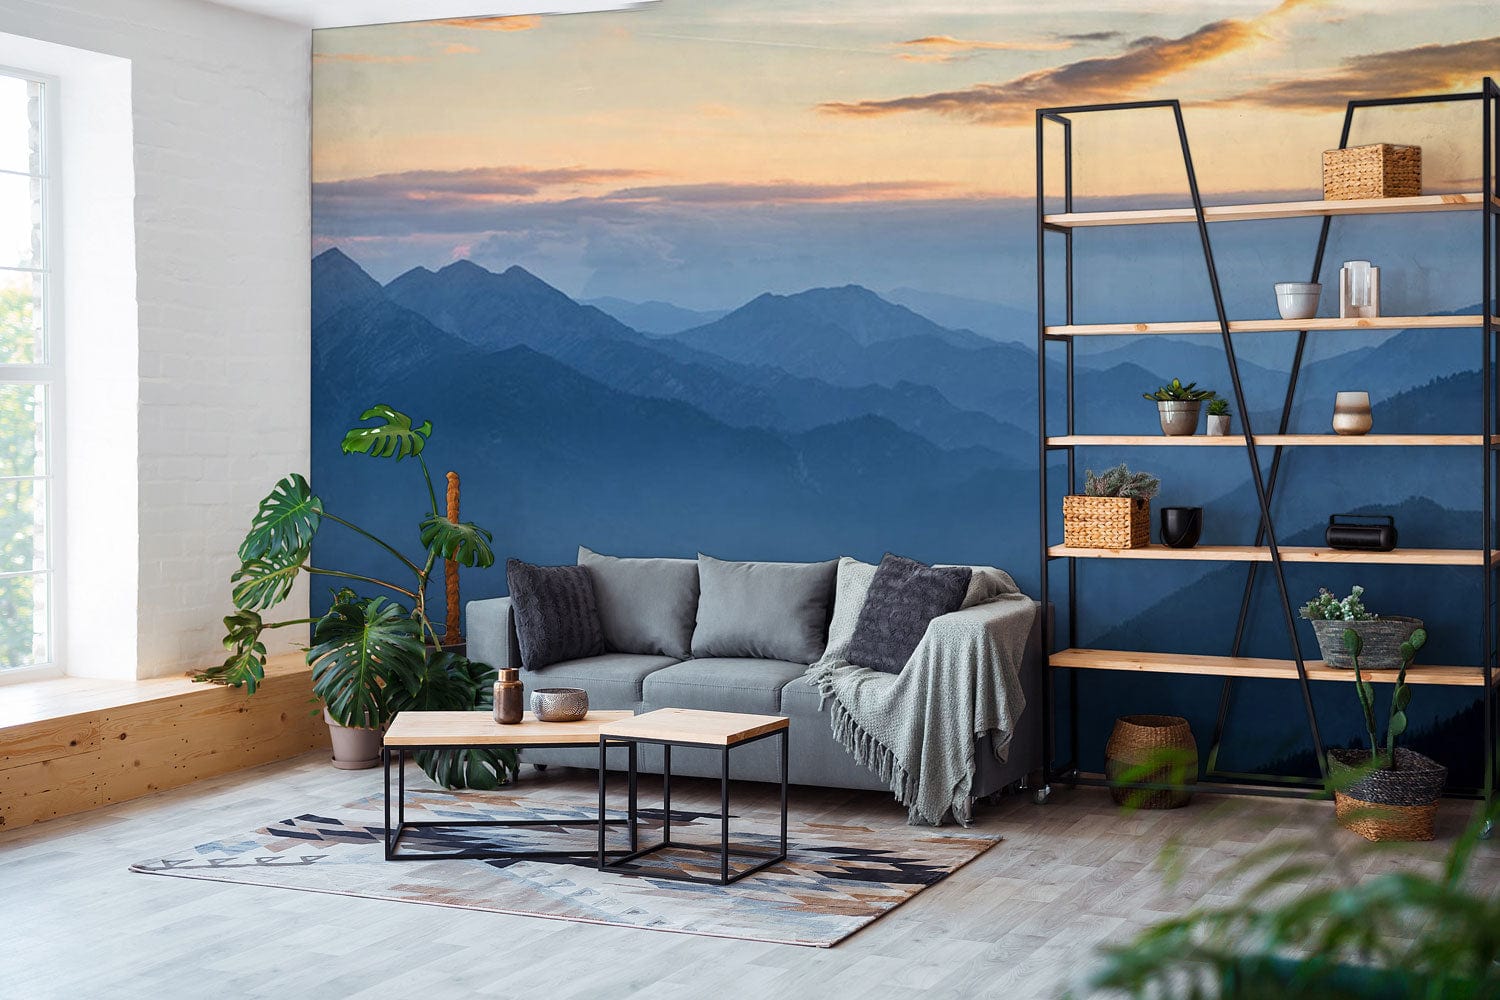 Mountains Separated from the Sky Landscapes Wallpaper Mural for the Decoration of the Living Room